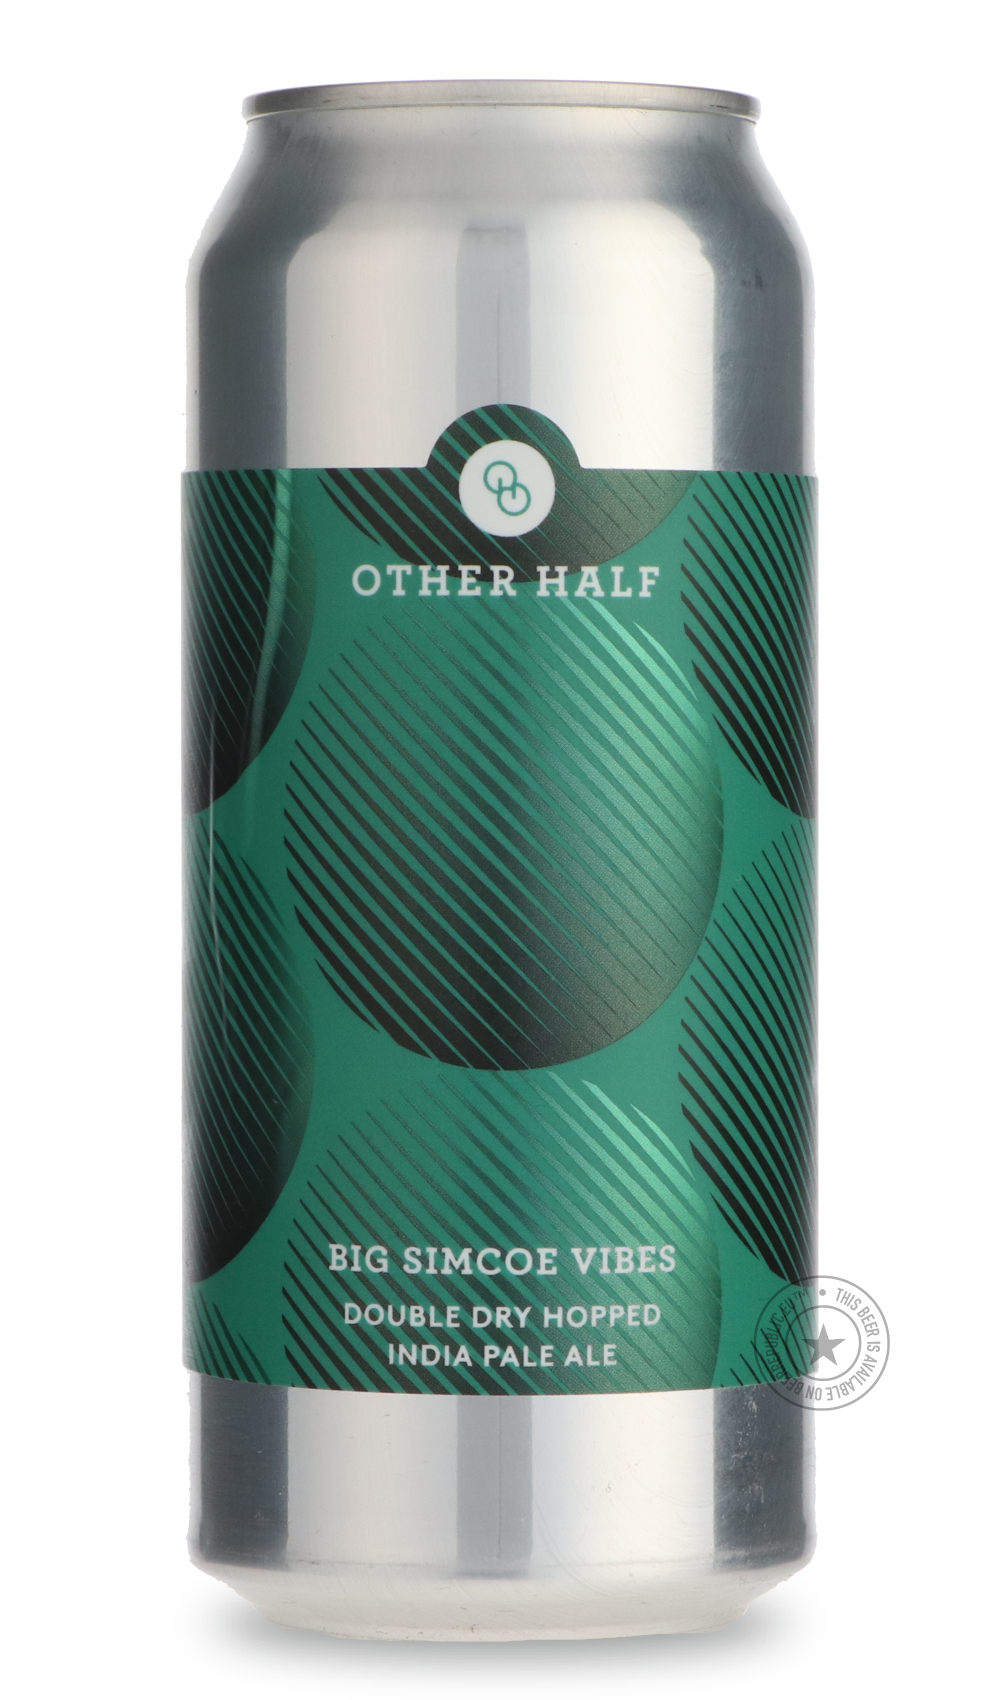 -Other Half- Big Simcoe Vibes-IPA- Only @ Beer Republic - The best online beer store for American & Canadian craft beer - Buy beer online from the USA and Canada - Bier online kopen - Amerikaans bier kopen - Craft beer store - Craft beer kopen - Amerikanisch bier kaufen - Bier online kaufen - Acheter biere online - IPA - Stout - Porter - New England IPA - Hazy IPA - Imperial Stout - Barrel Aged - Barrel Aged Imperial Stout - Brown - Dark beer - Blond - Blonde - Pilsner - Lager - Wheat - Weizen - Amber - Bar